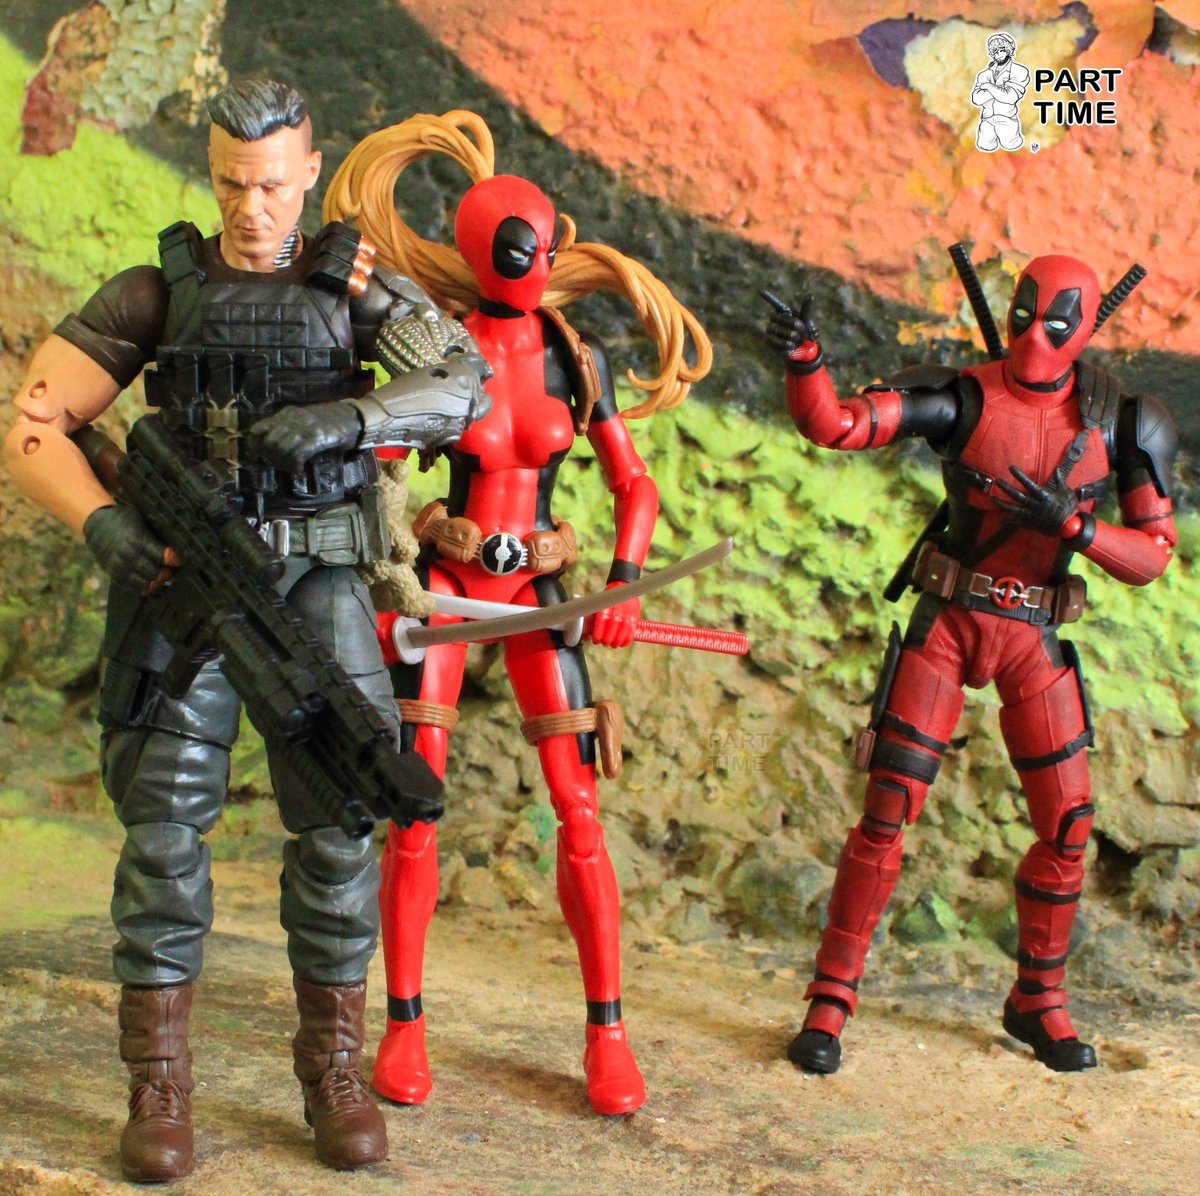 “Brolin? Josh, dude! What do you mean you’d rather work with her?”
#JoshBrolin #ryanrenolds #wandawilson #deadpool #ladydeadpool #cable #marvel #marvellegends #hasbro #hasbromarvellegends #marvellegendsphotography #hasbrophotography #toyphotography